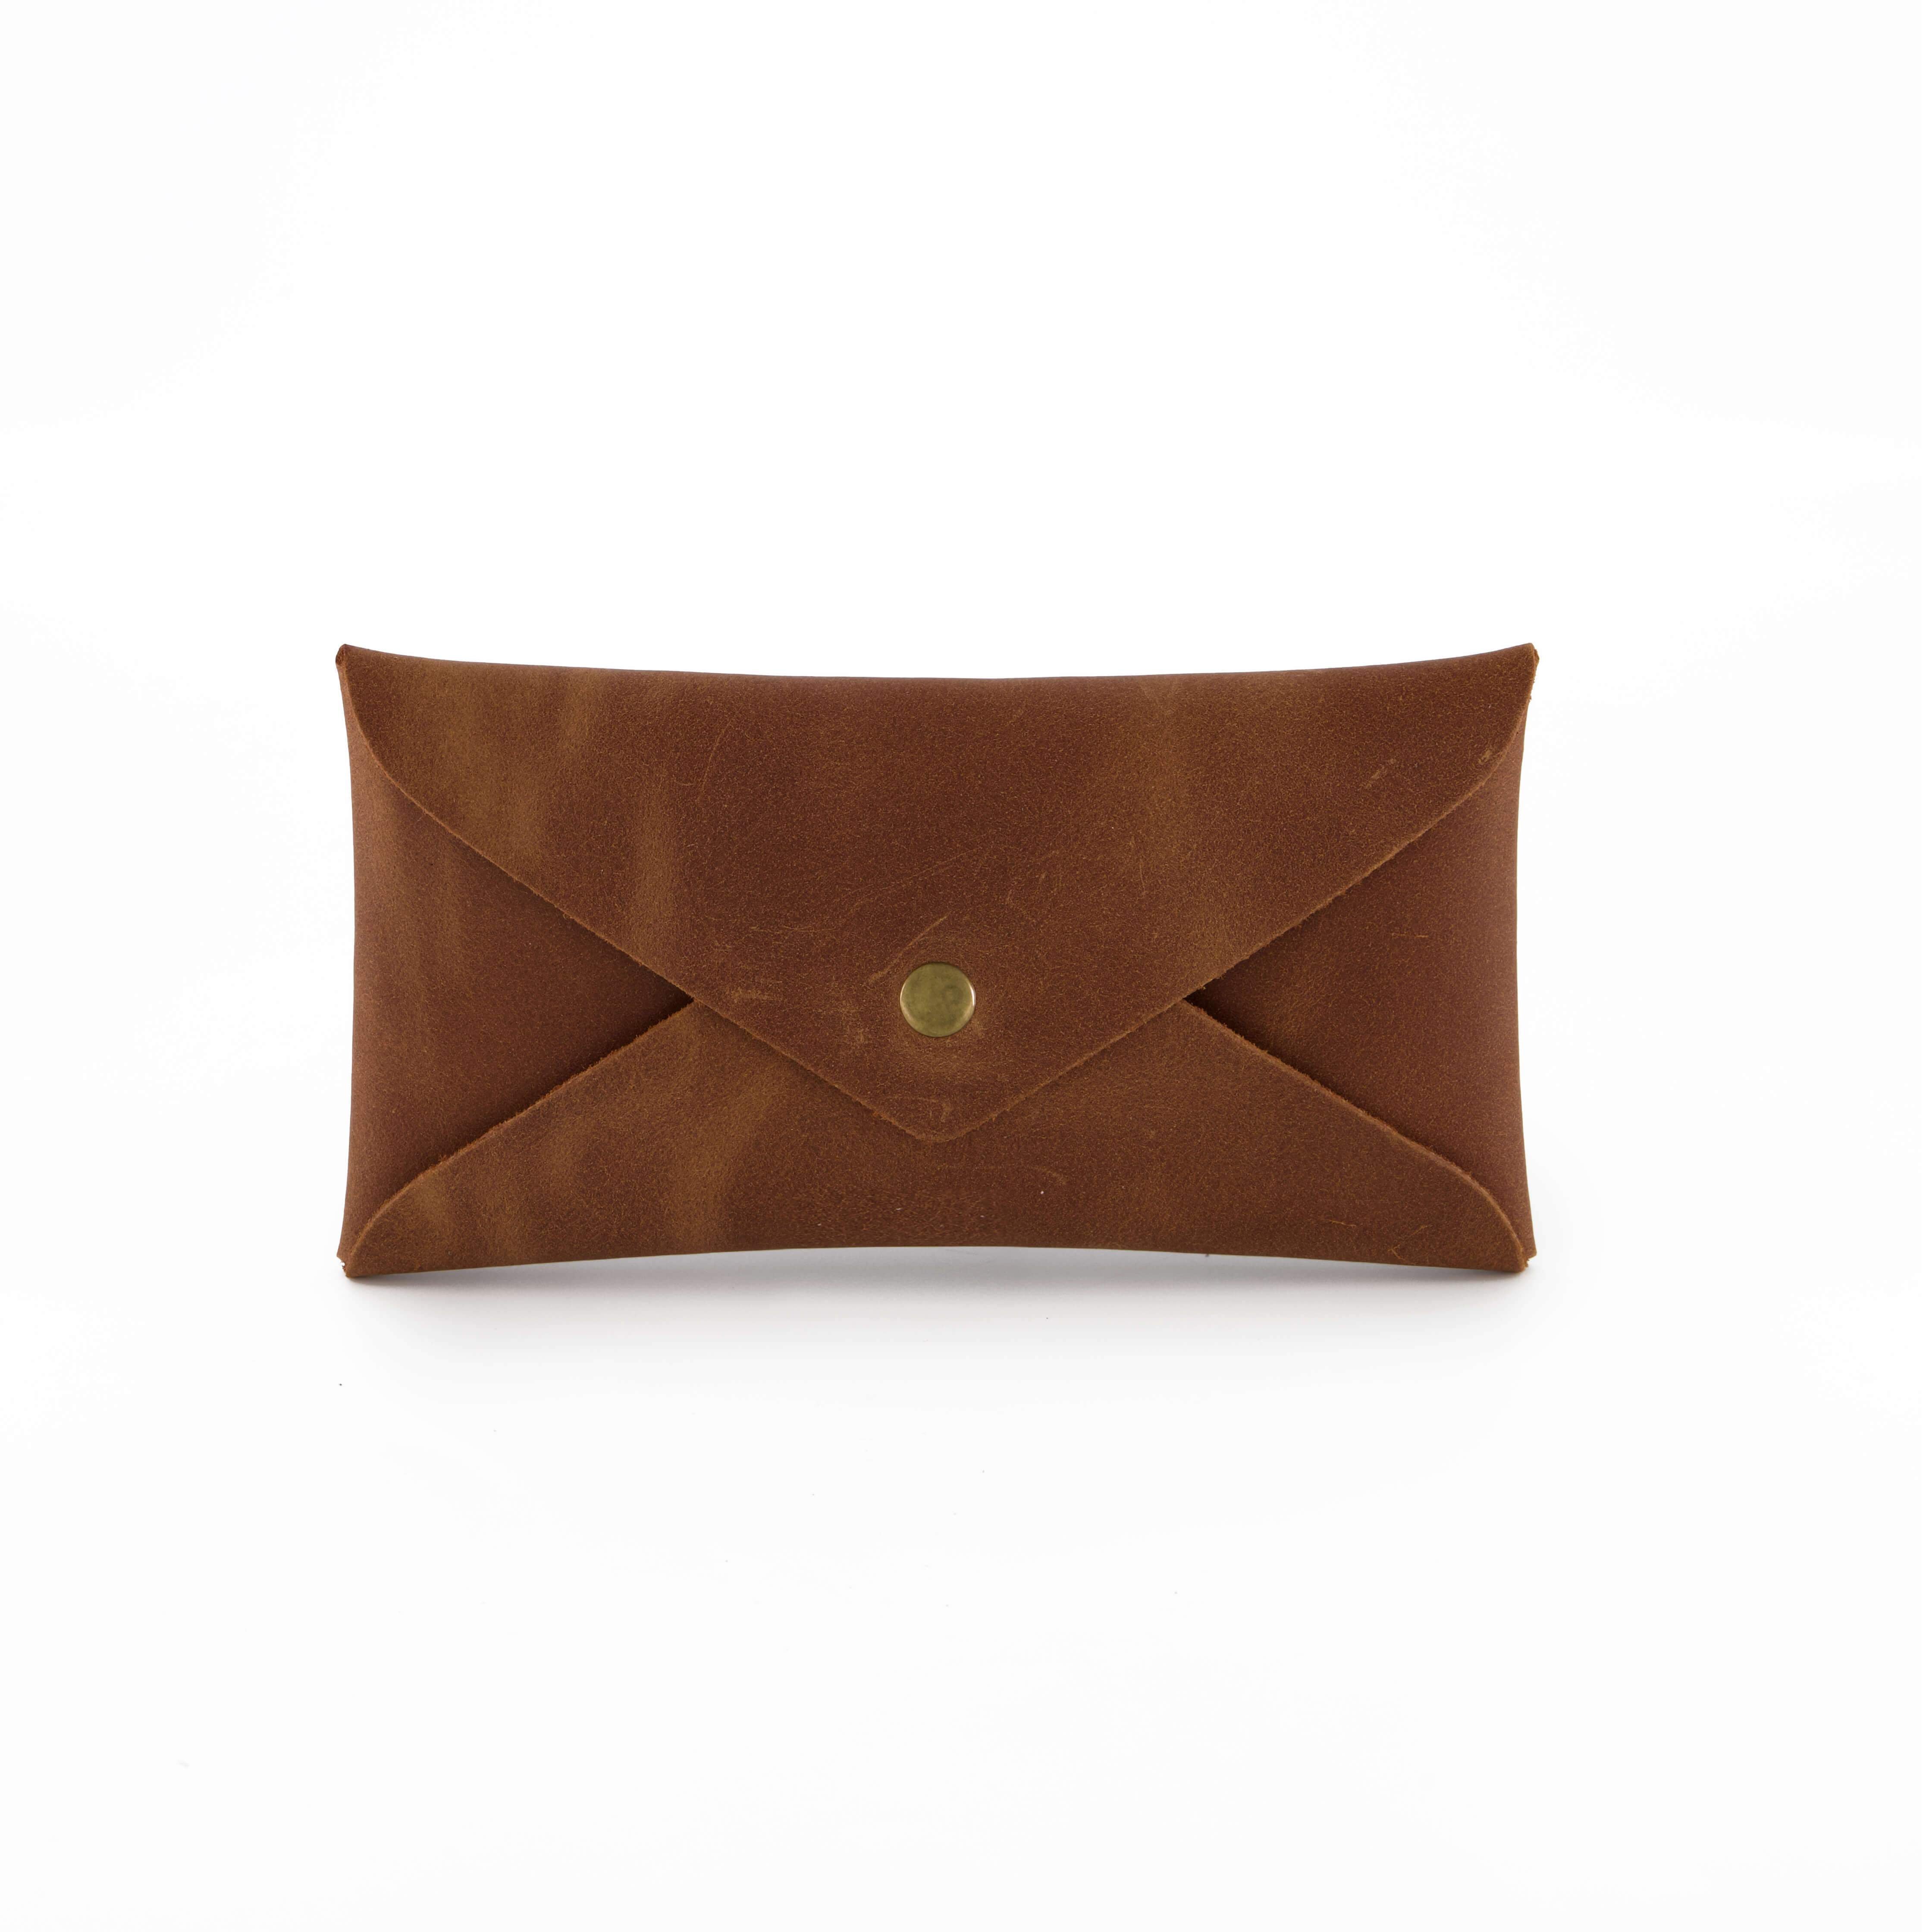 LEATHER CLUTCH Bag Leather Envelope Clutch Handmade Leather 